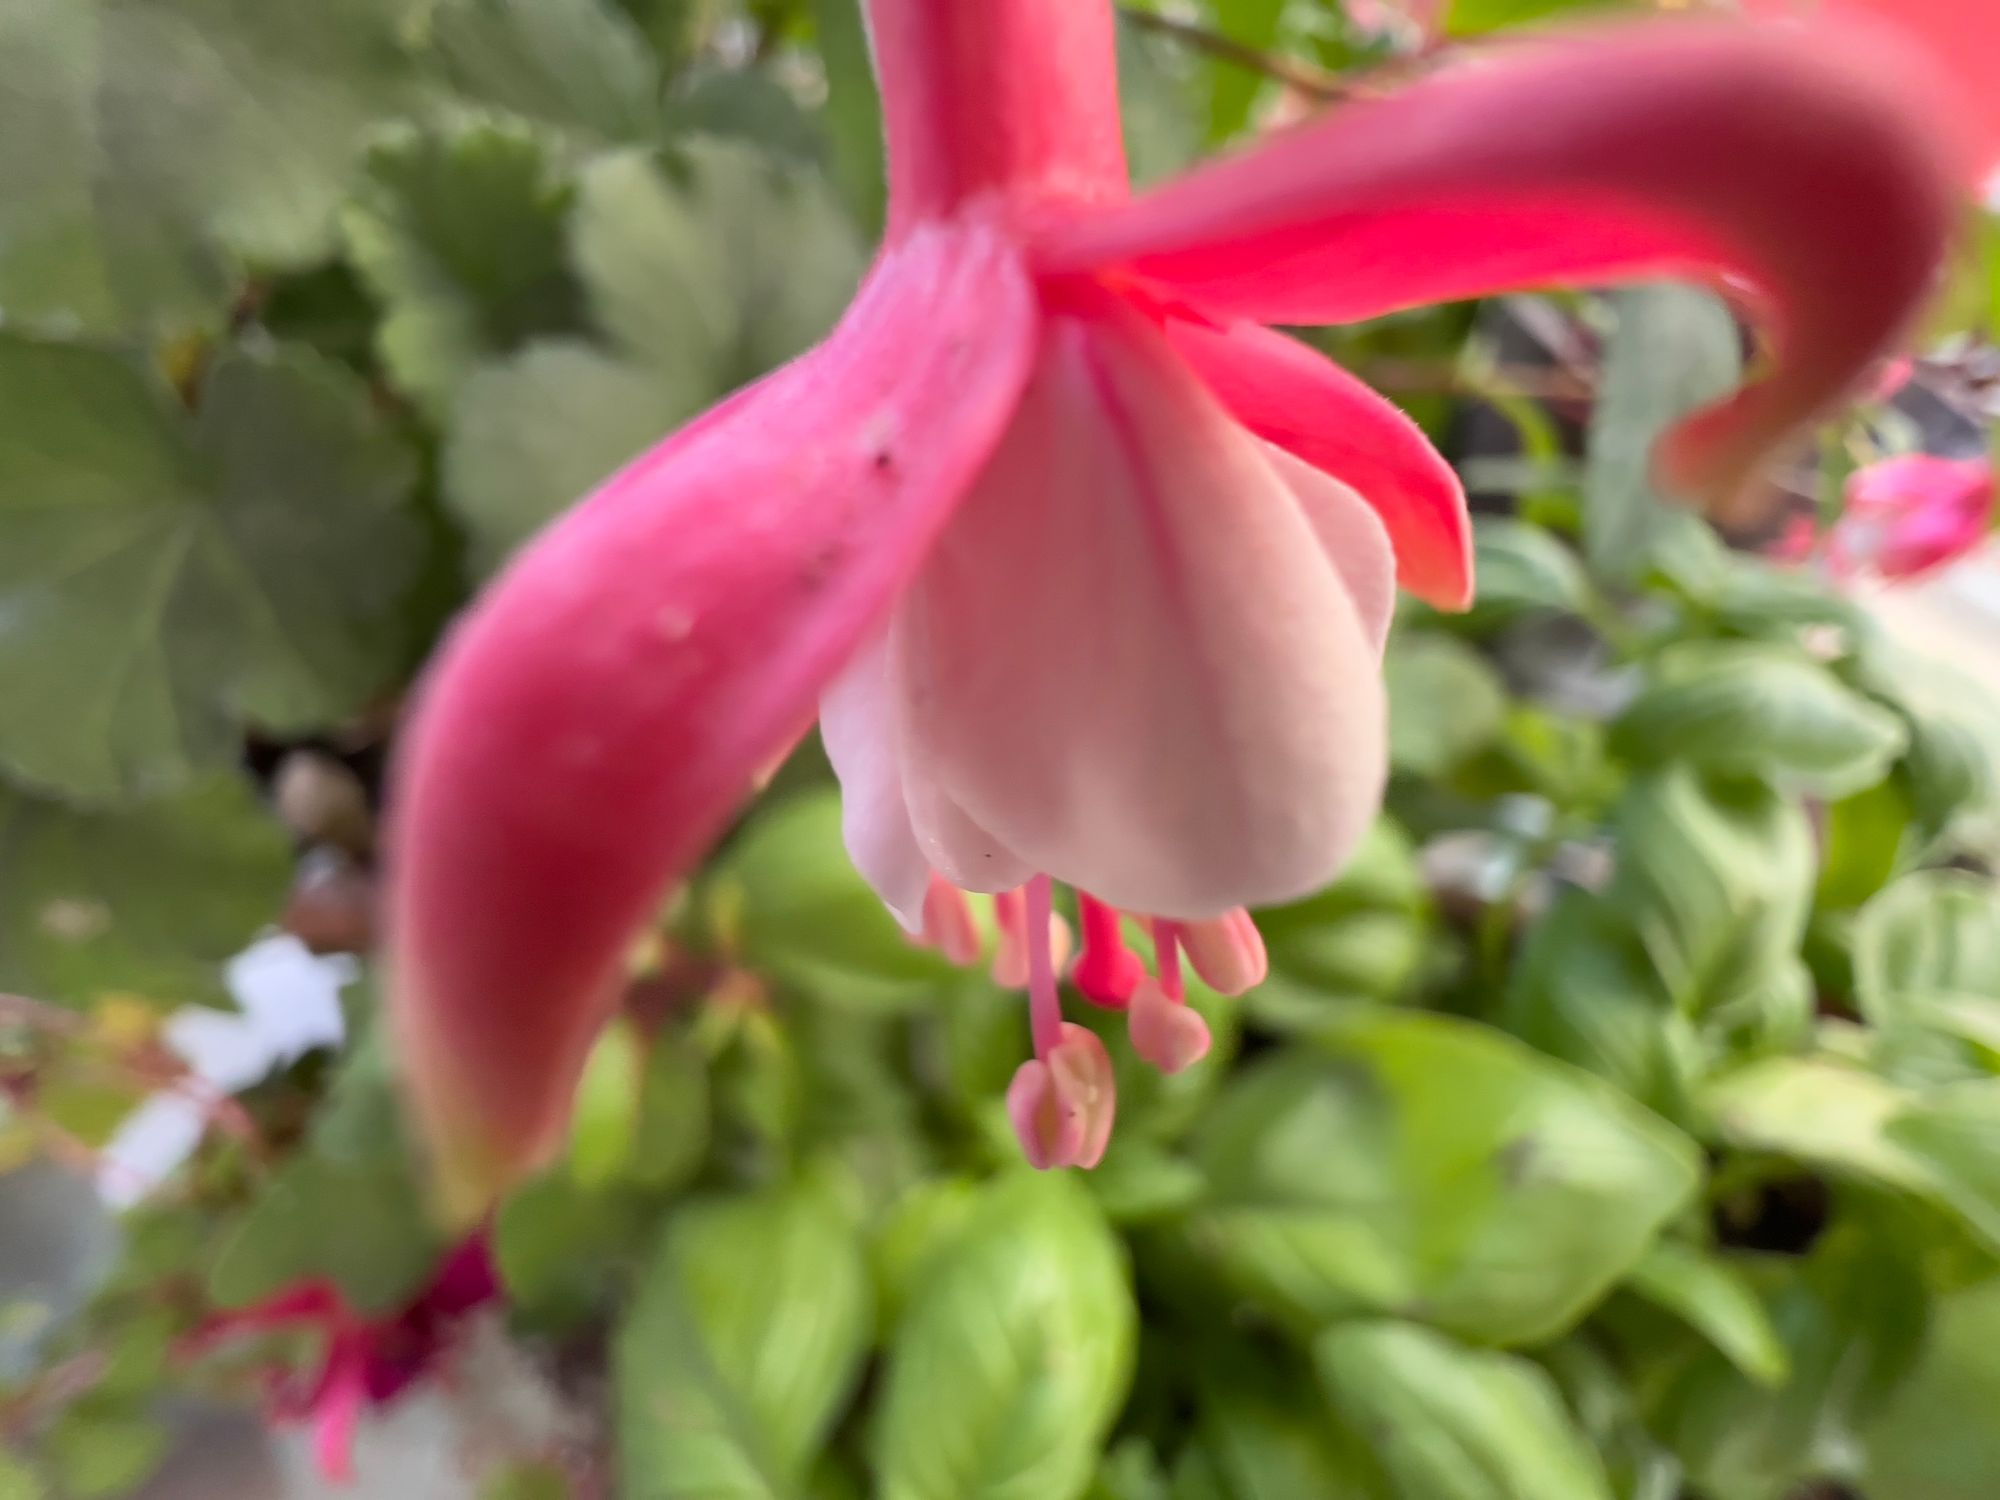 A miniature red-pink and white fuchsia flower in close-up hangs over some basil.